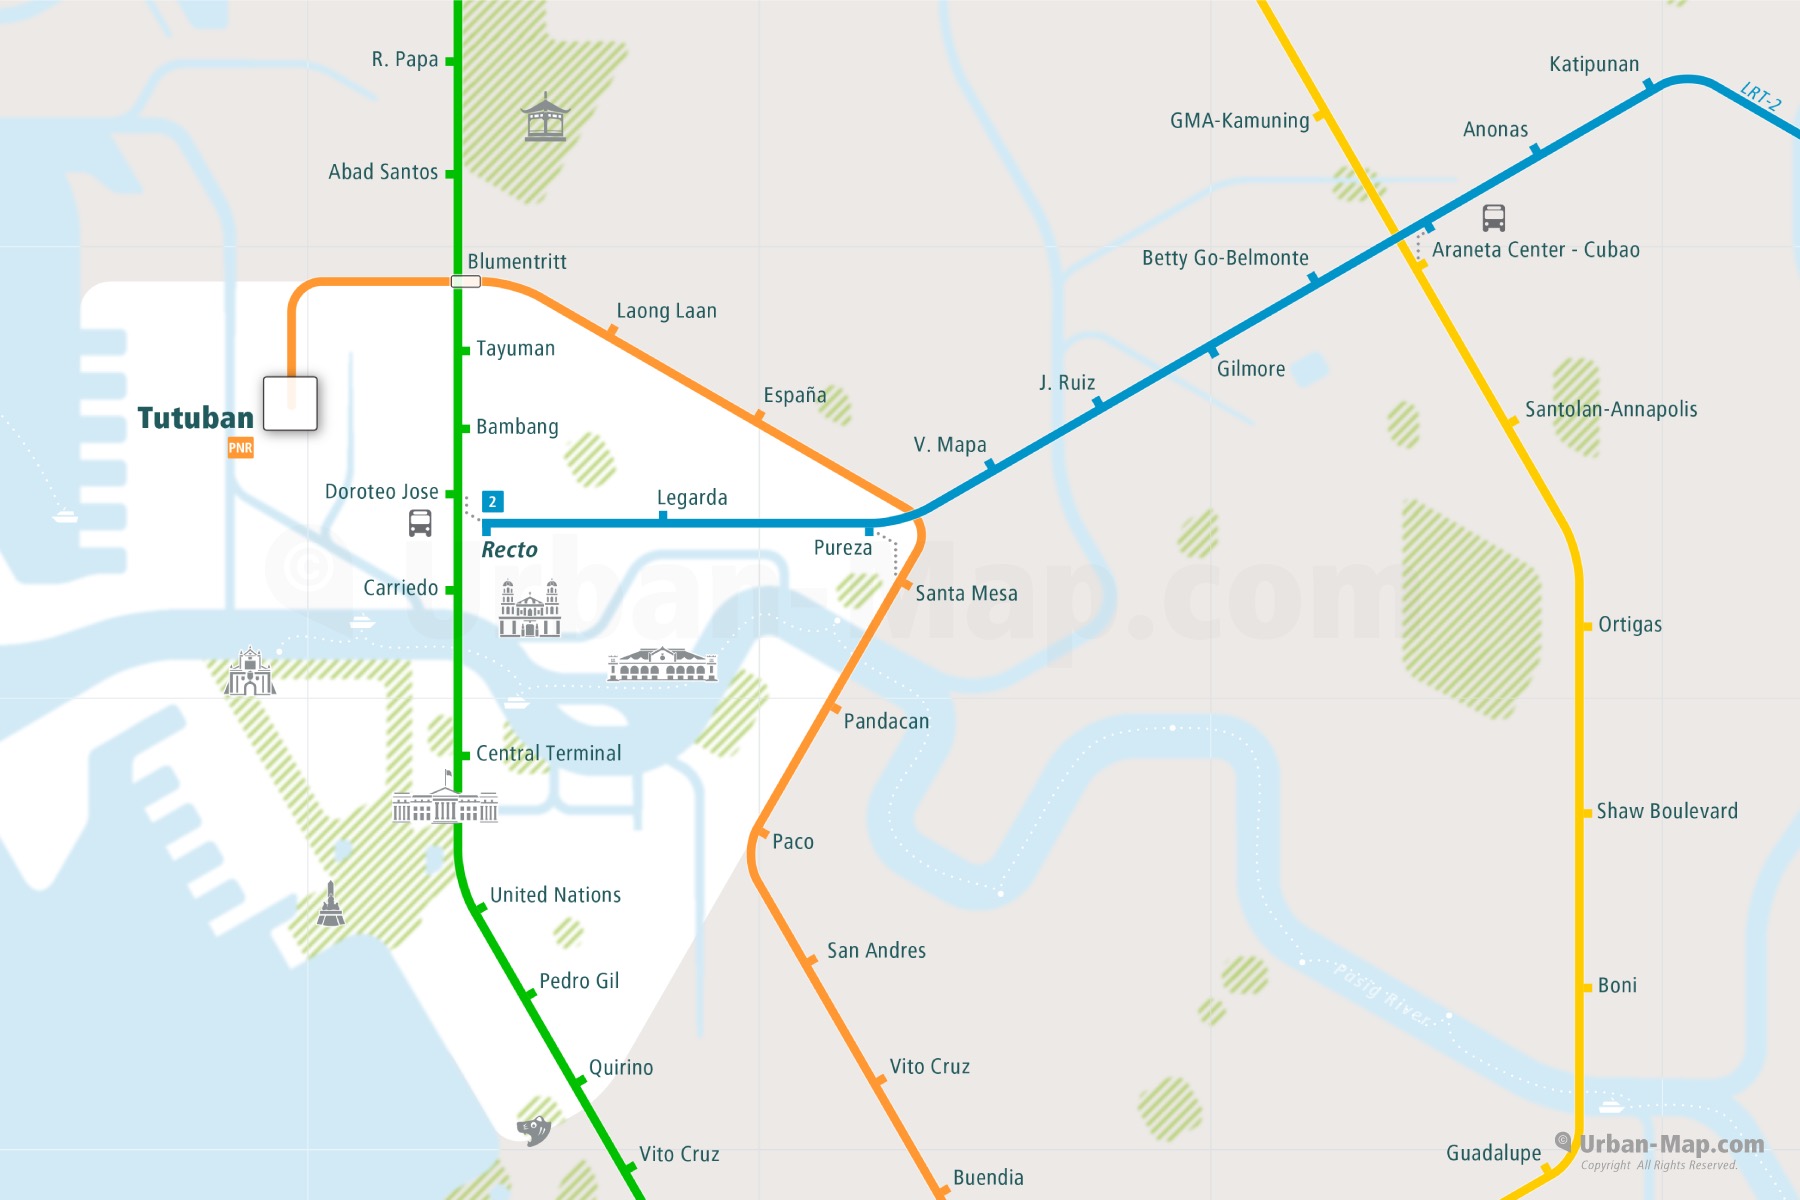 Manila City Rail Map shows the train and public transportation routes of metro - Close-Up